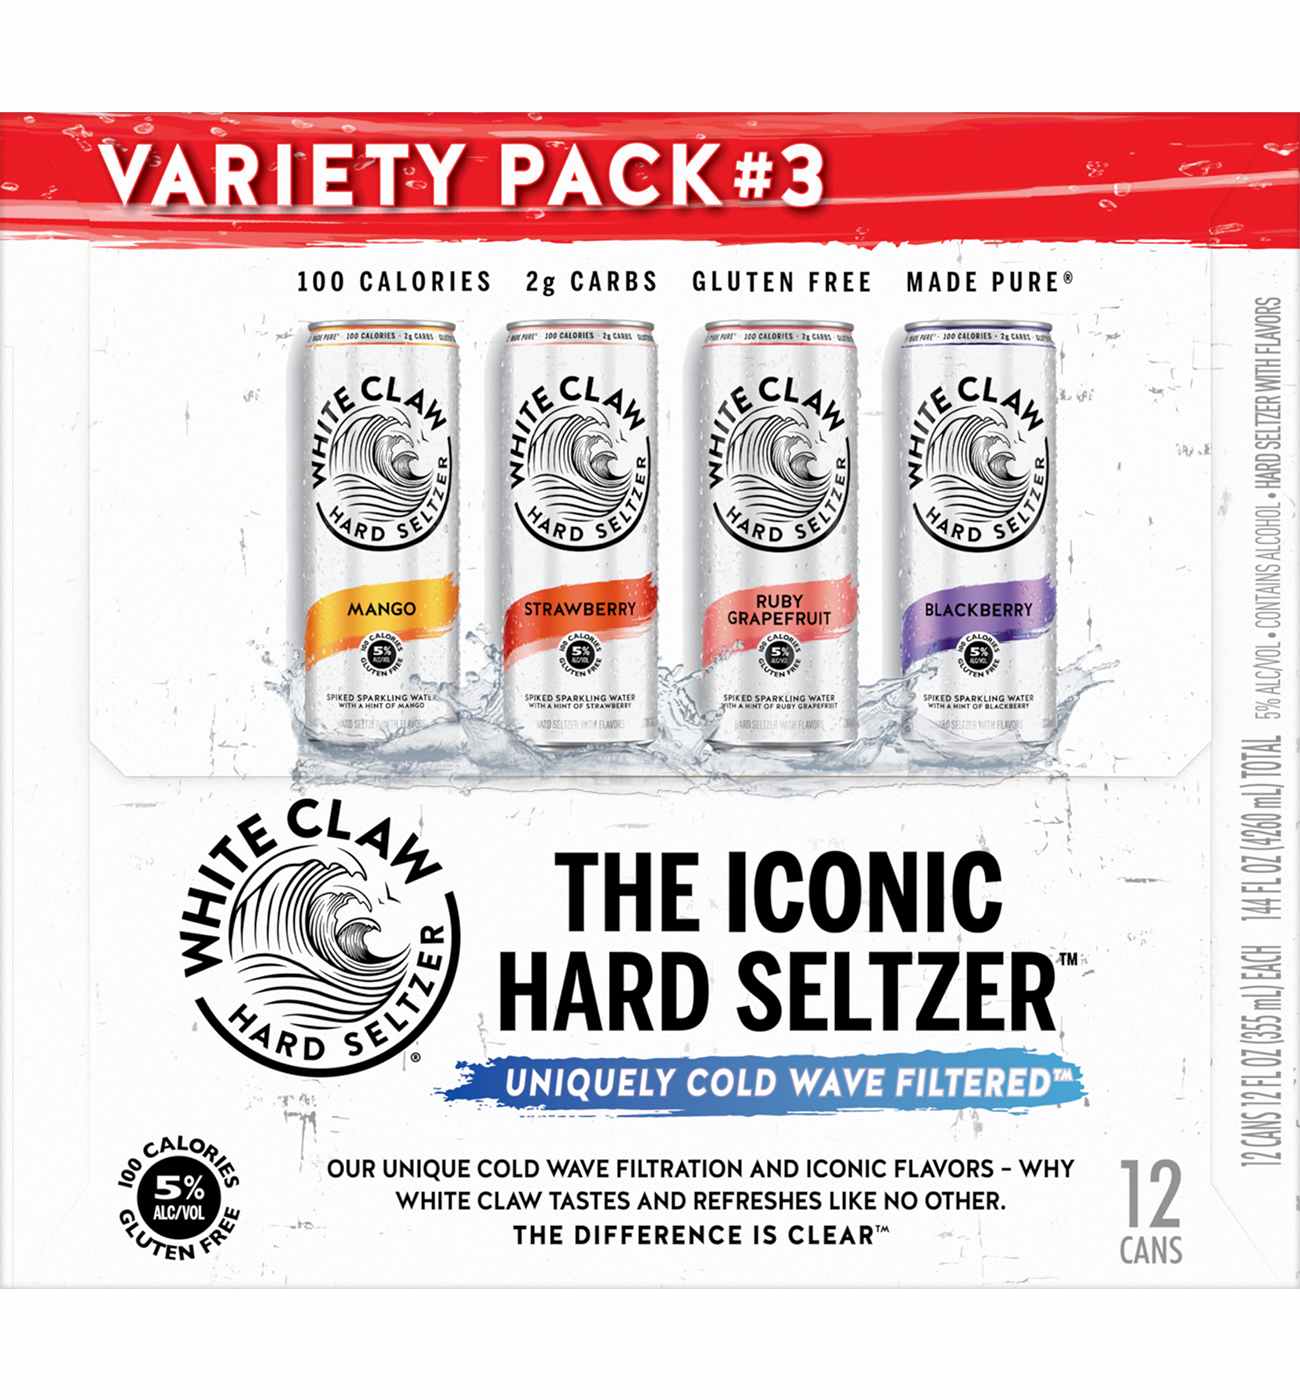 White Claw Hard Seltzer Variety Pack 12 pk Cans - Flavor Collection No. 3; image 4 of 4